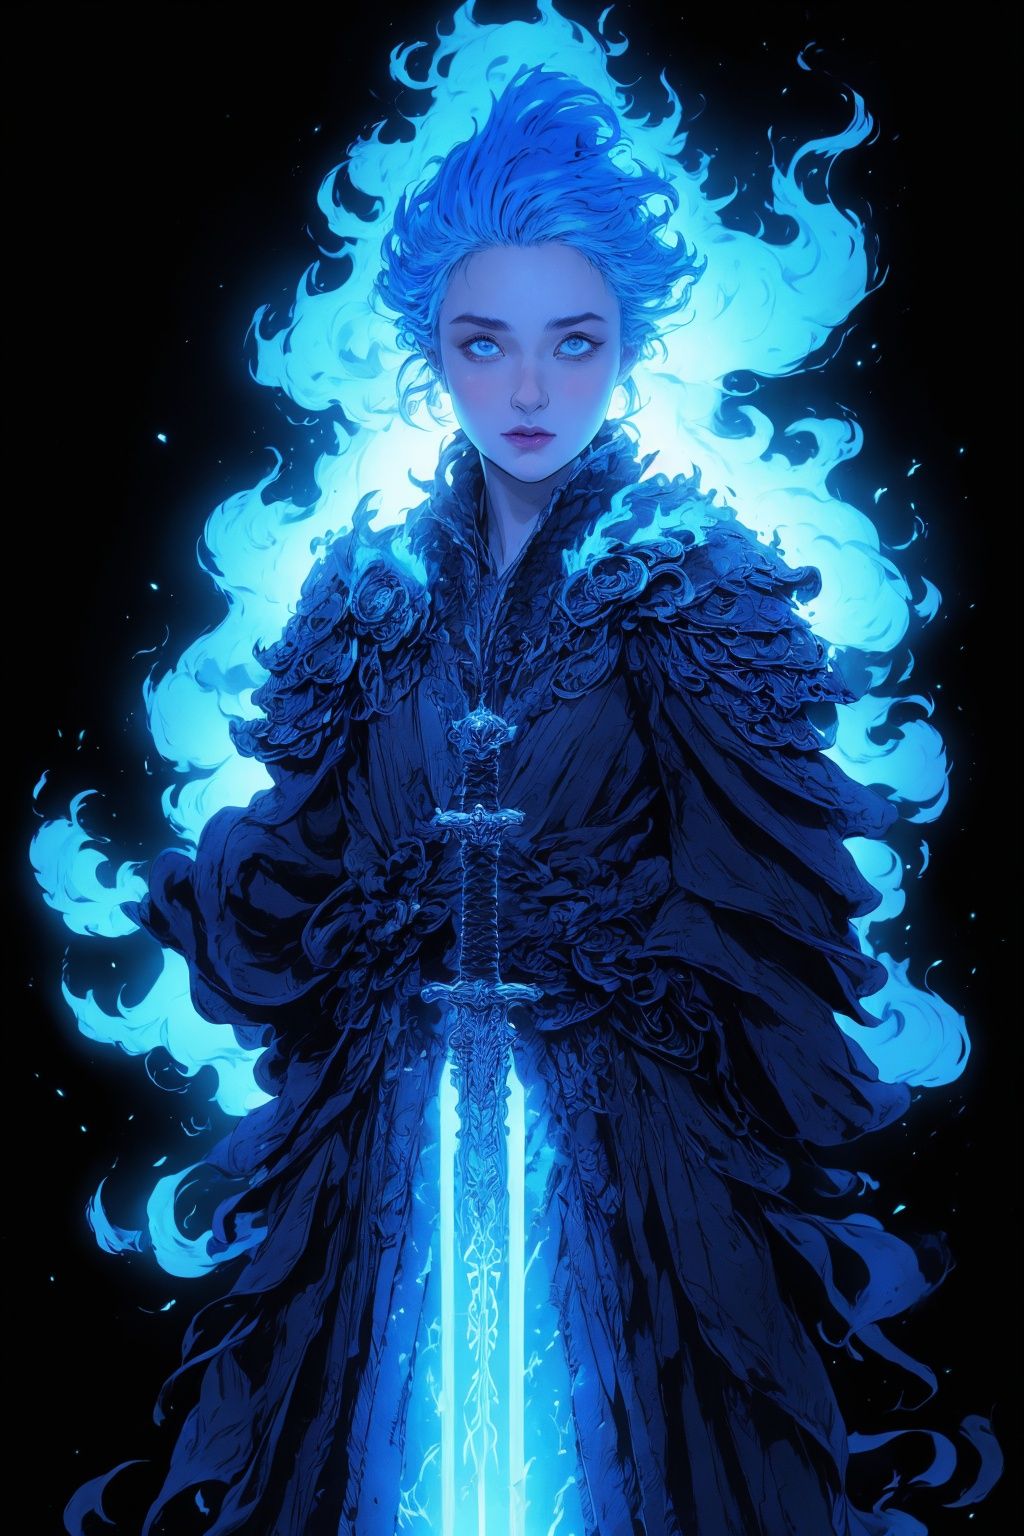 masterpiece,best quality,1girl,8K,HDR,<lora:Xguang-000020:0.6>,Xguang,blue theme,black_background,BLUE FLAME,flame hair,armor,Xguang,weapon,fire,armor,simple_background, Pottery of a Gigantic (Female Lawyer:1.3) , hillside, Bathed in shadows, Sharp and in focus, [ (art by Jules Cheret:1.1) : (Brothers Hildebrandt:0.7) :16], Cozy, Tinycore, Depth of field 270mm, in the style of Star Wars, UHD